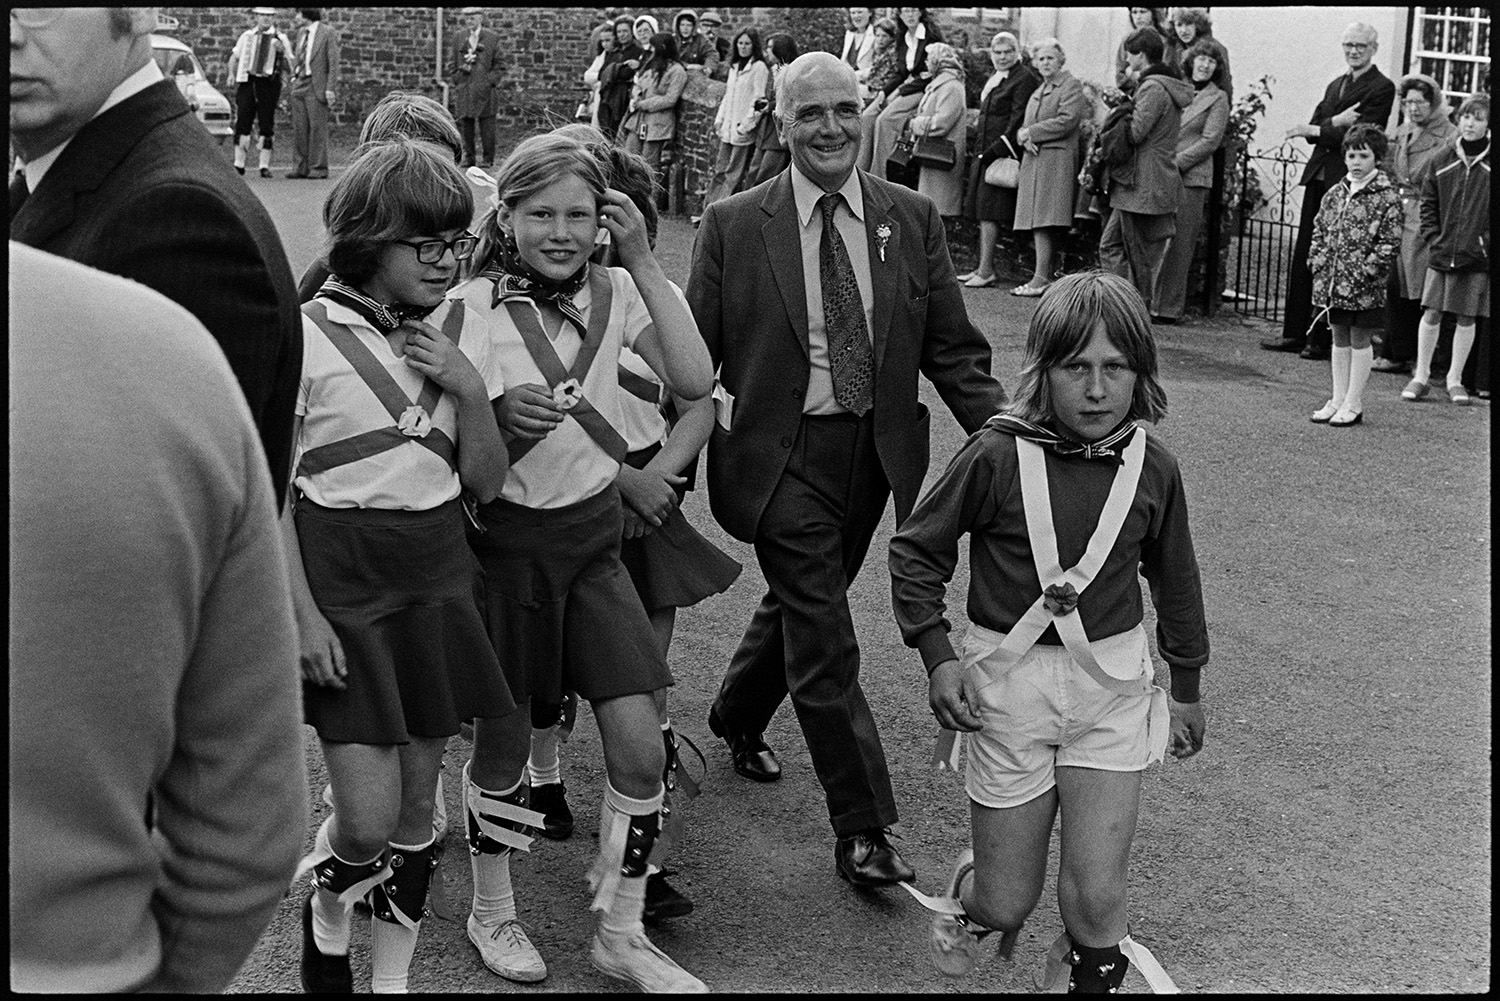 Children Morris dancing in village street. 
[Children Morris Dancers walking through a street in High Bickington with a man after performing in the celebrations for the Silver Jubilee of Queen Elizabeth II. Spectators can be seen in the background.]